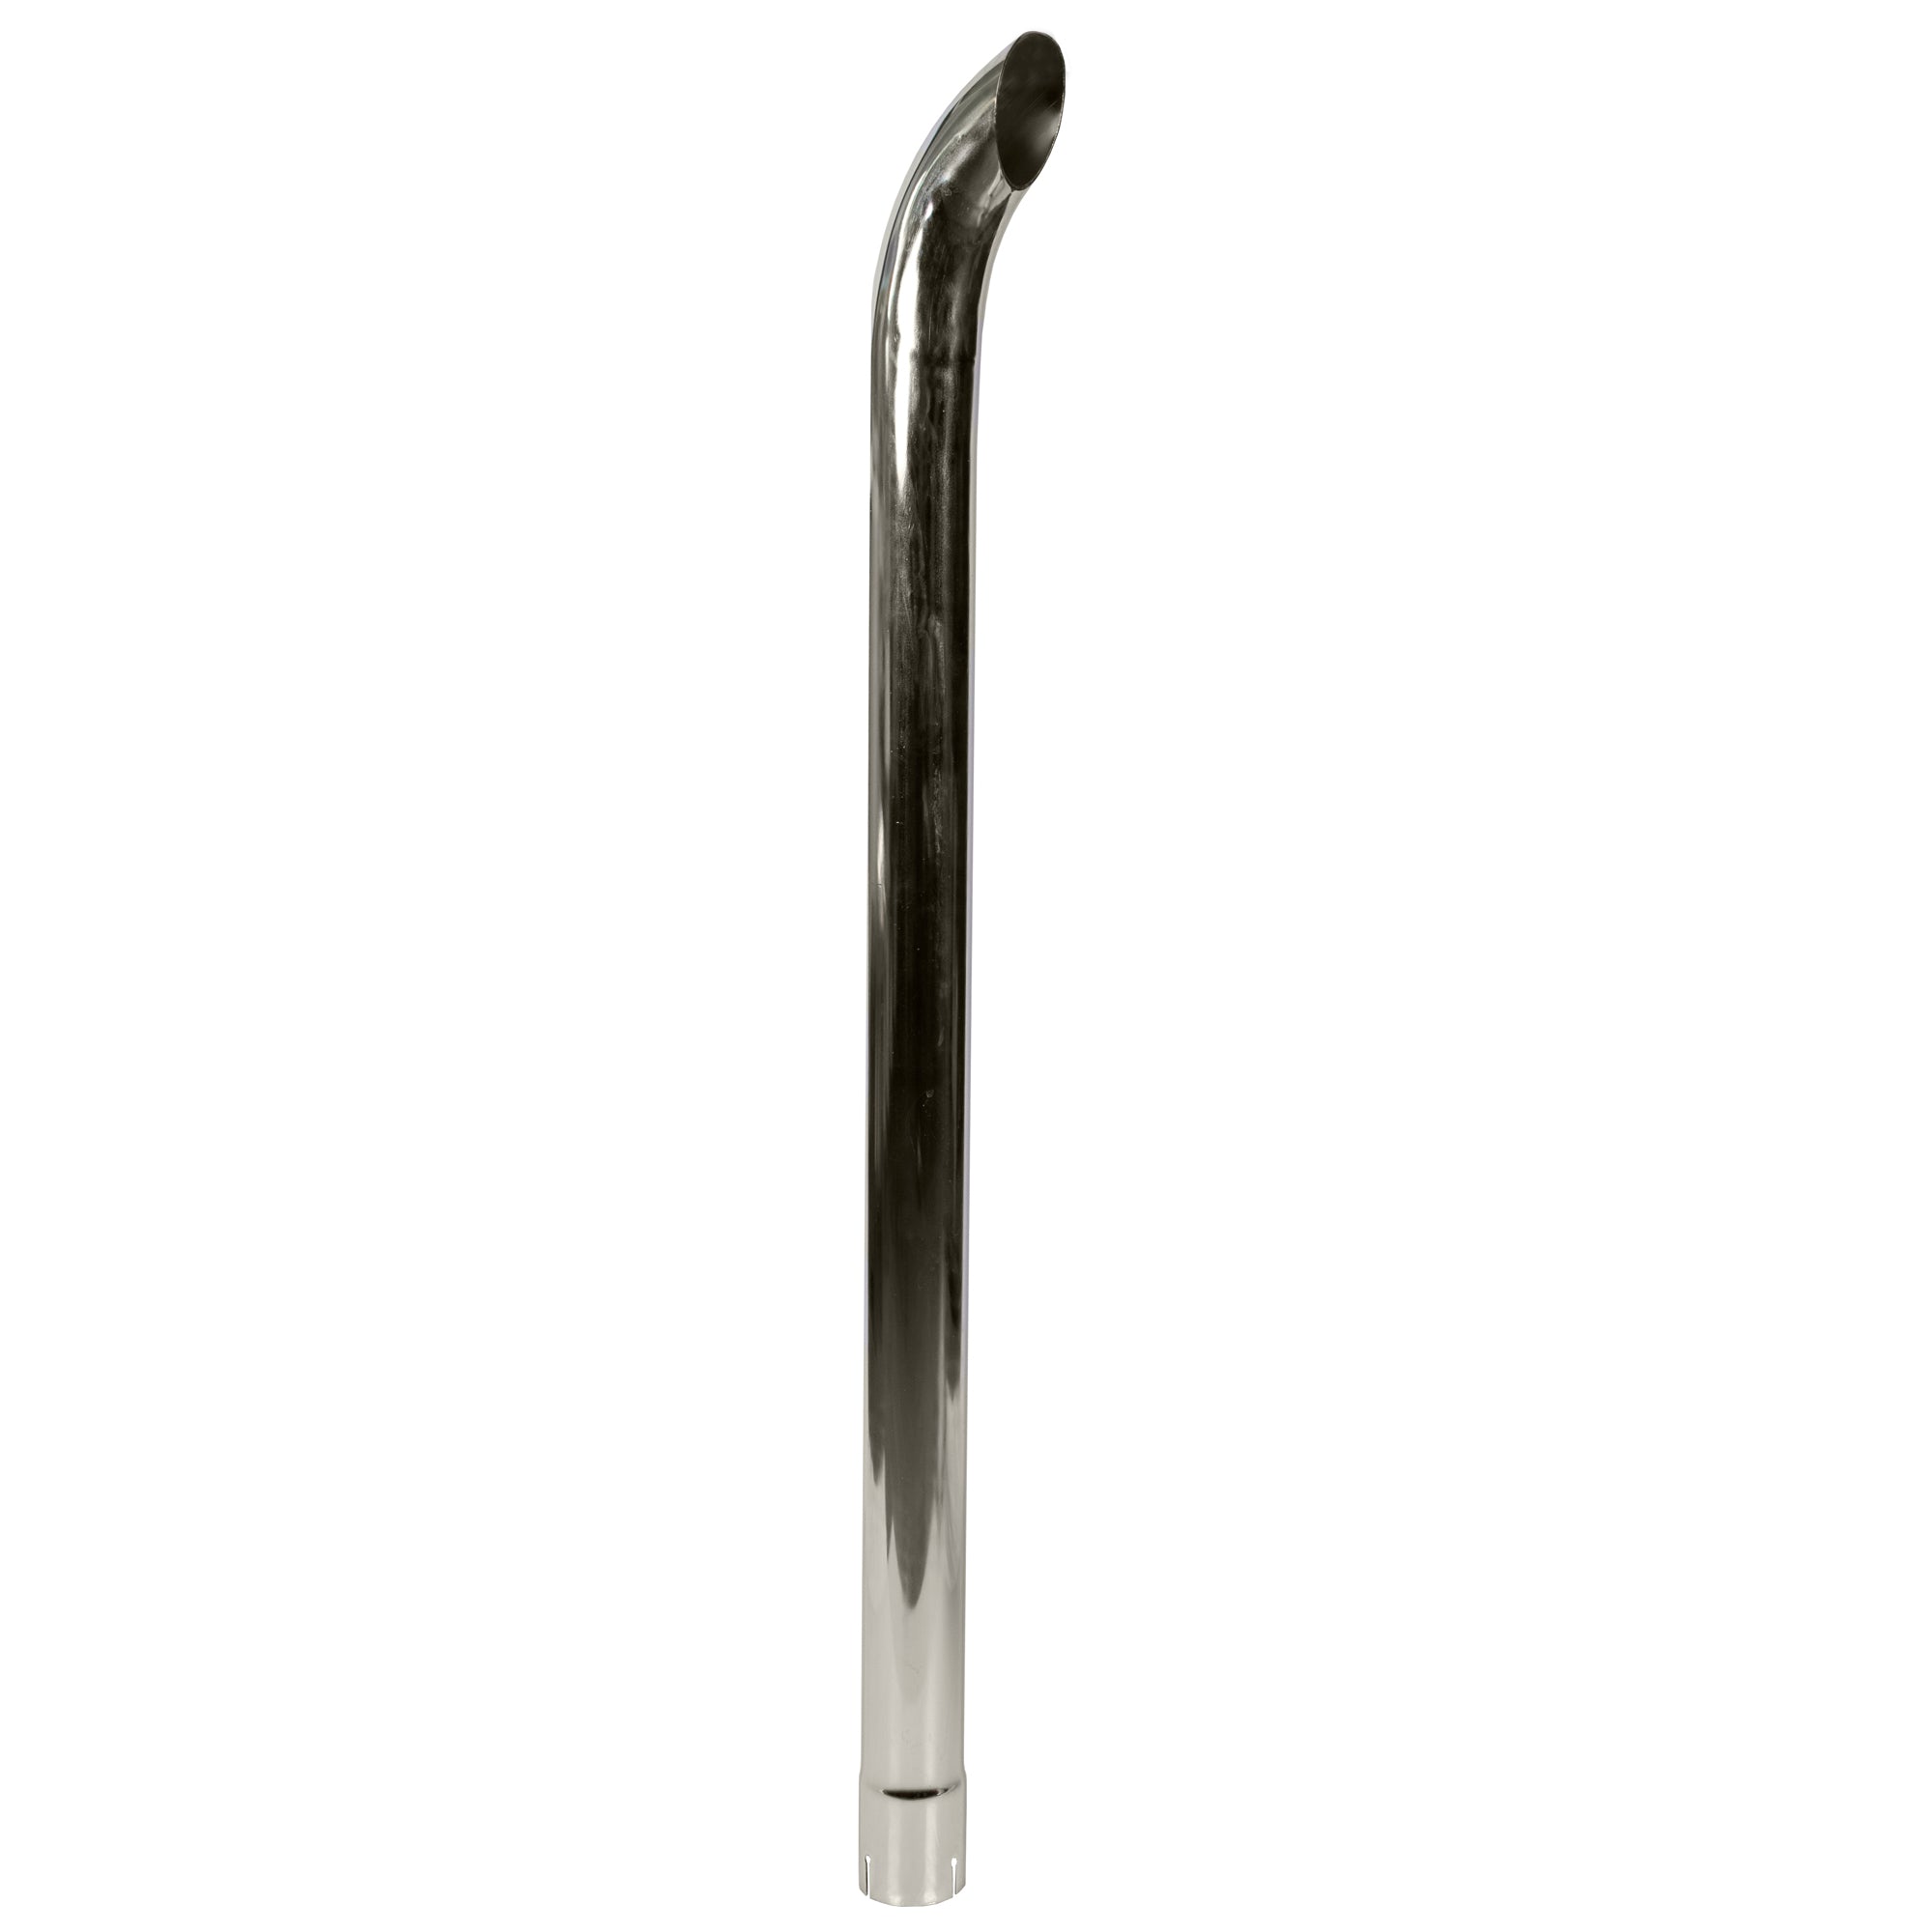 Exhaust Pipe Stack Replacement UNIVERSAL - 2-3/4" x 48", Curved Chrome